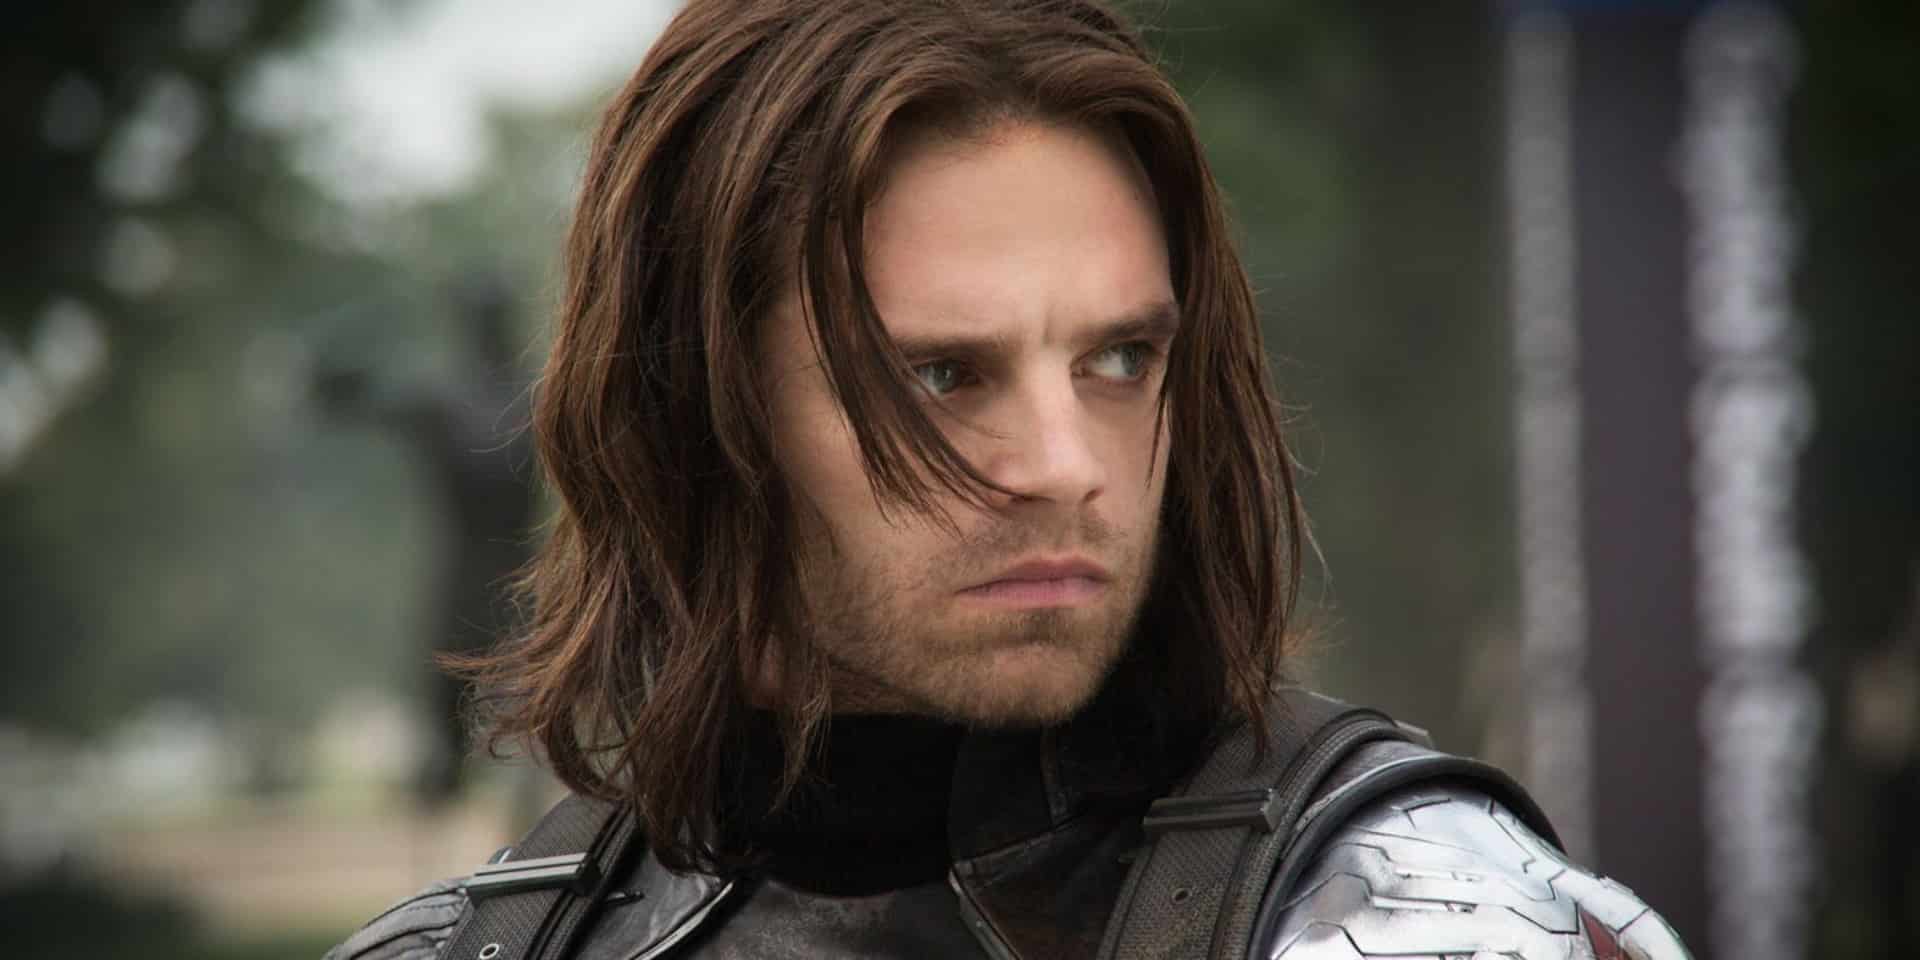 marvel-Winter-soldier-bad-paying-for-creators-GamersRD (1)